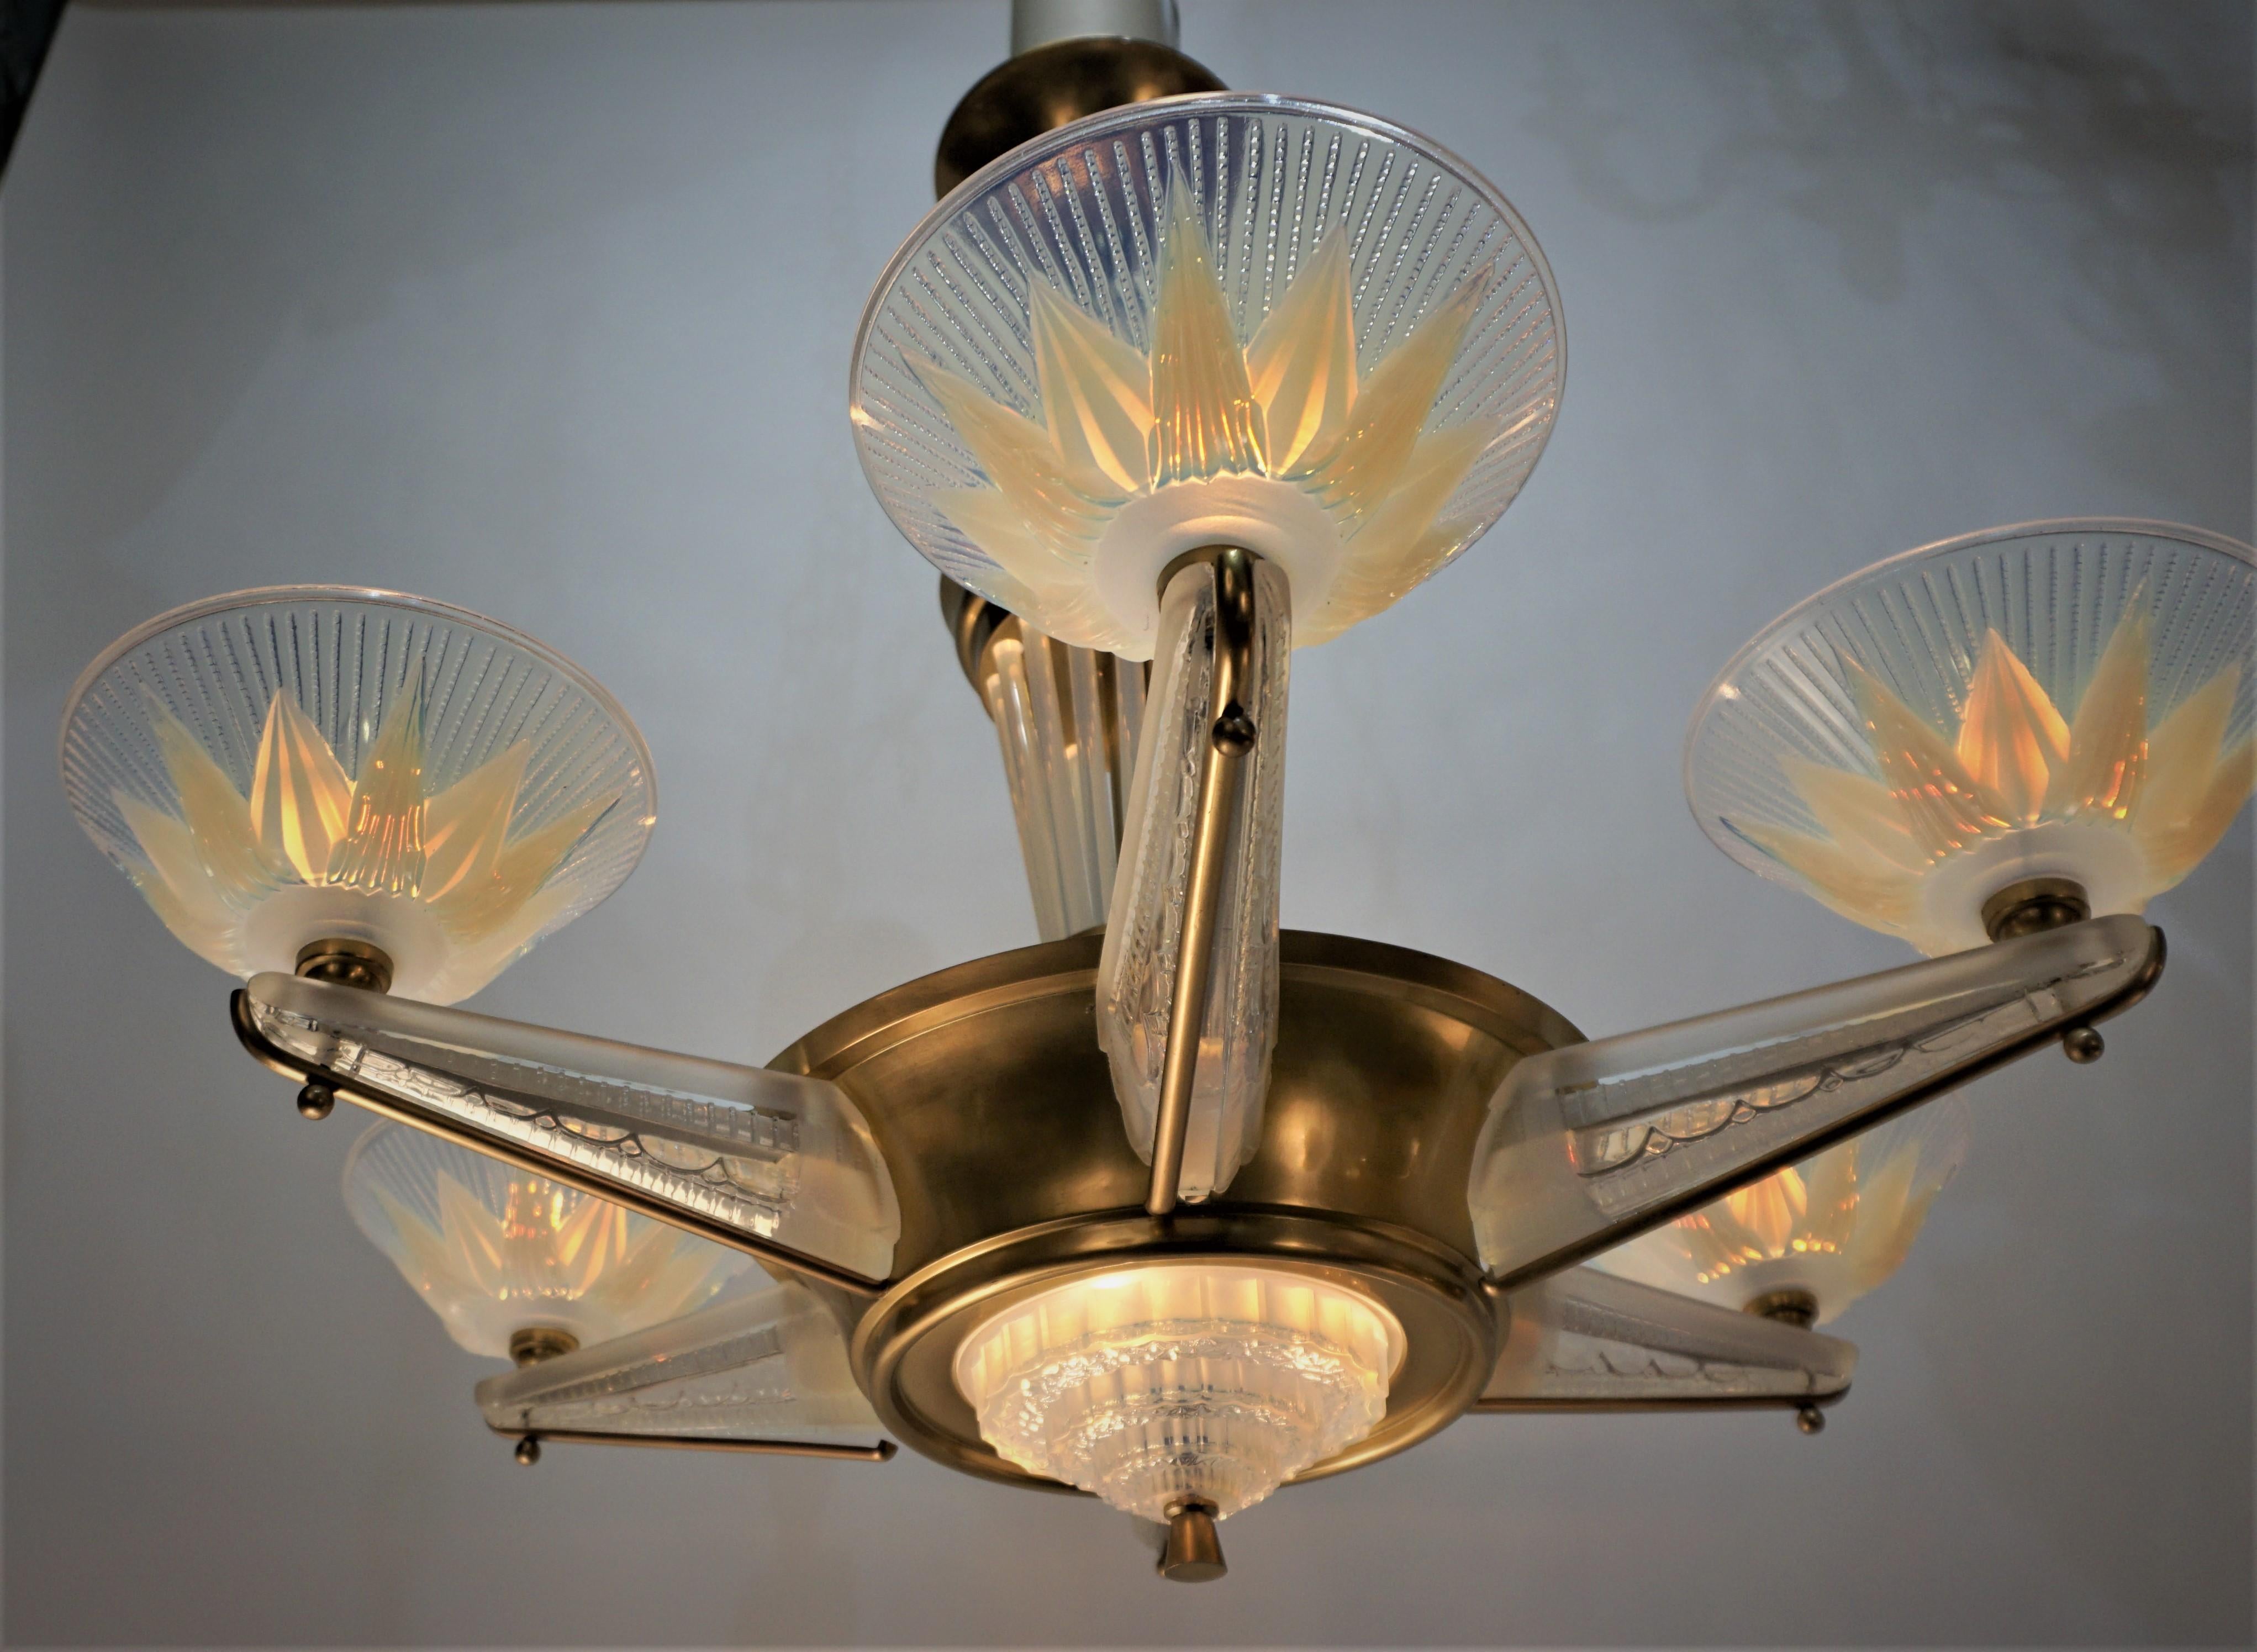 A stunning French polished bronze Art Deco six-arm chandeliers with opalescent glass arms and shades even the center column adorned with opalescent glass. This chandelier has total of nine lights.